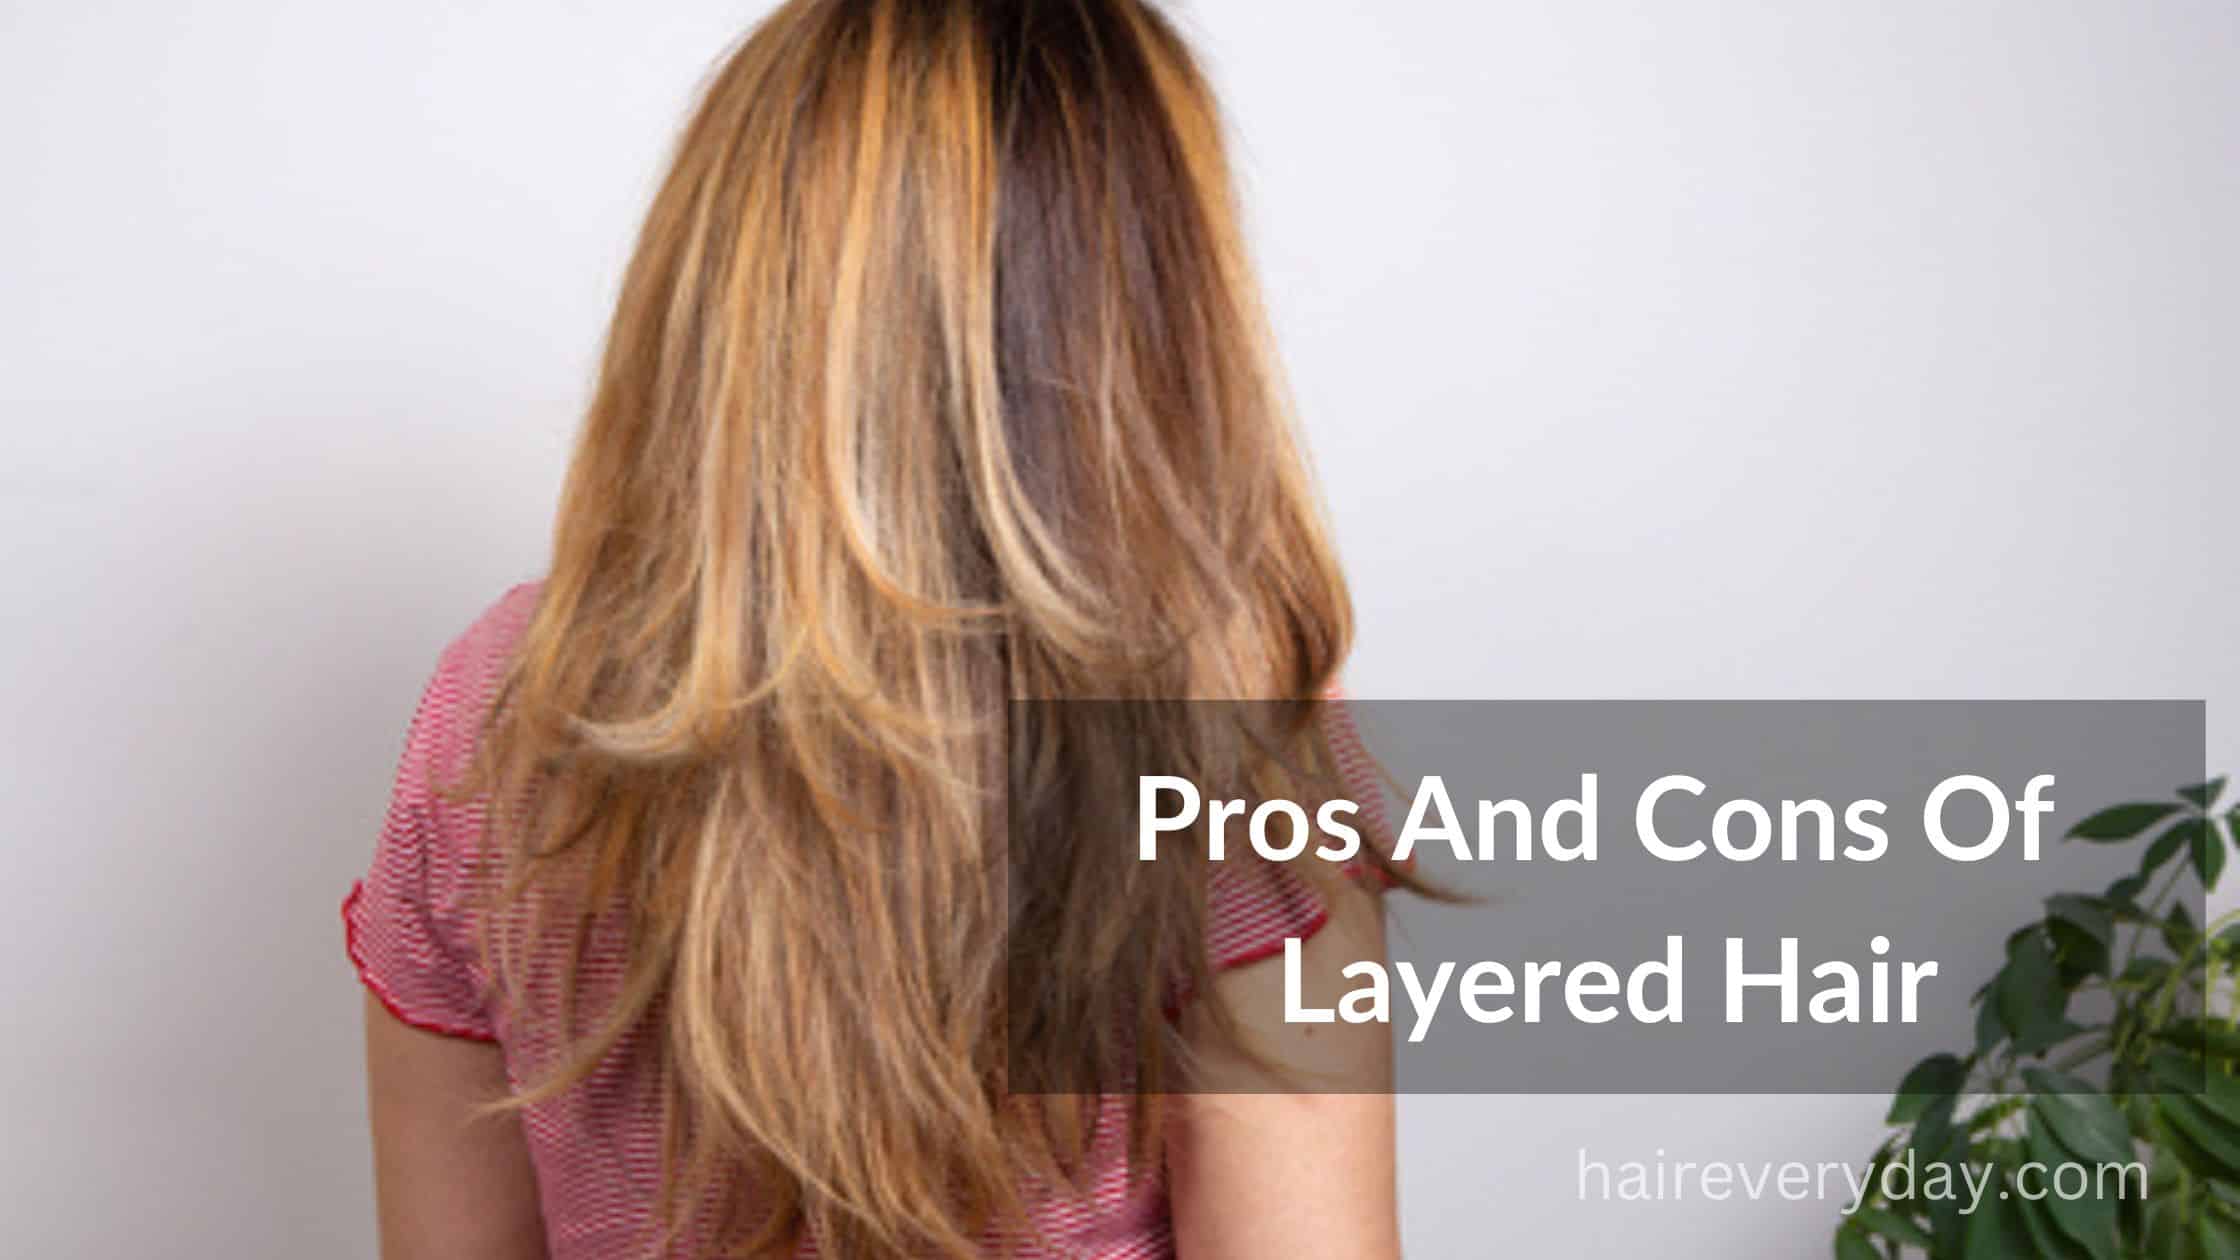 Here Are Some Pros And Cons Of Layered Hair | Is It The Right Haircut For  You? - Hair Everyday Review